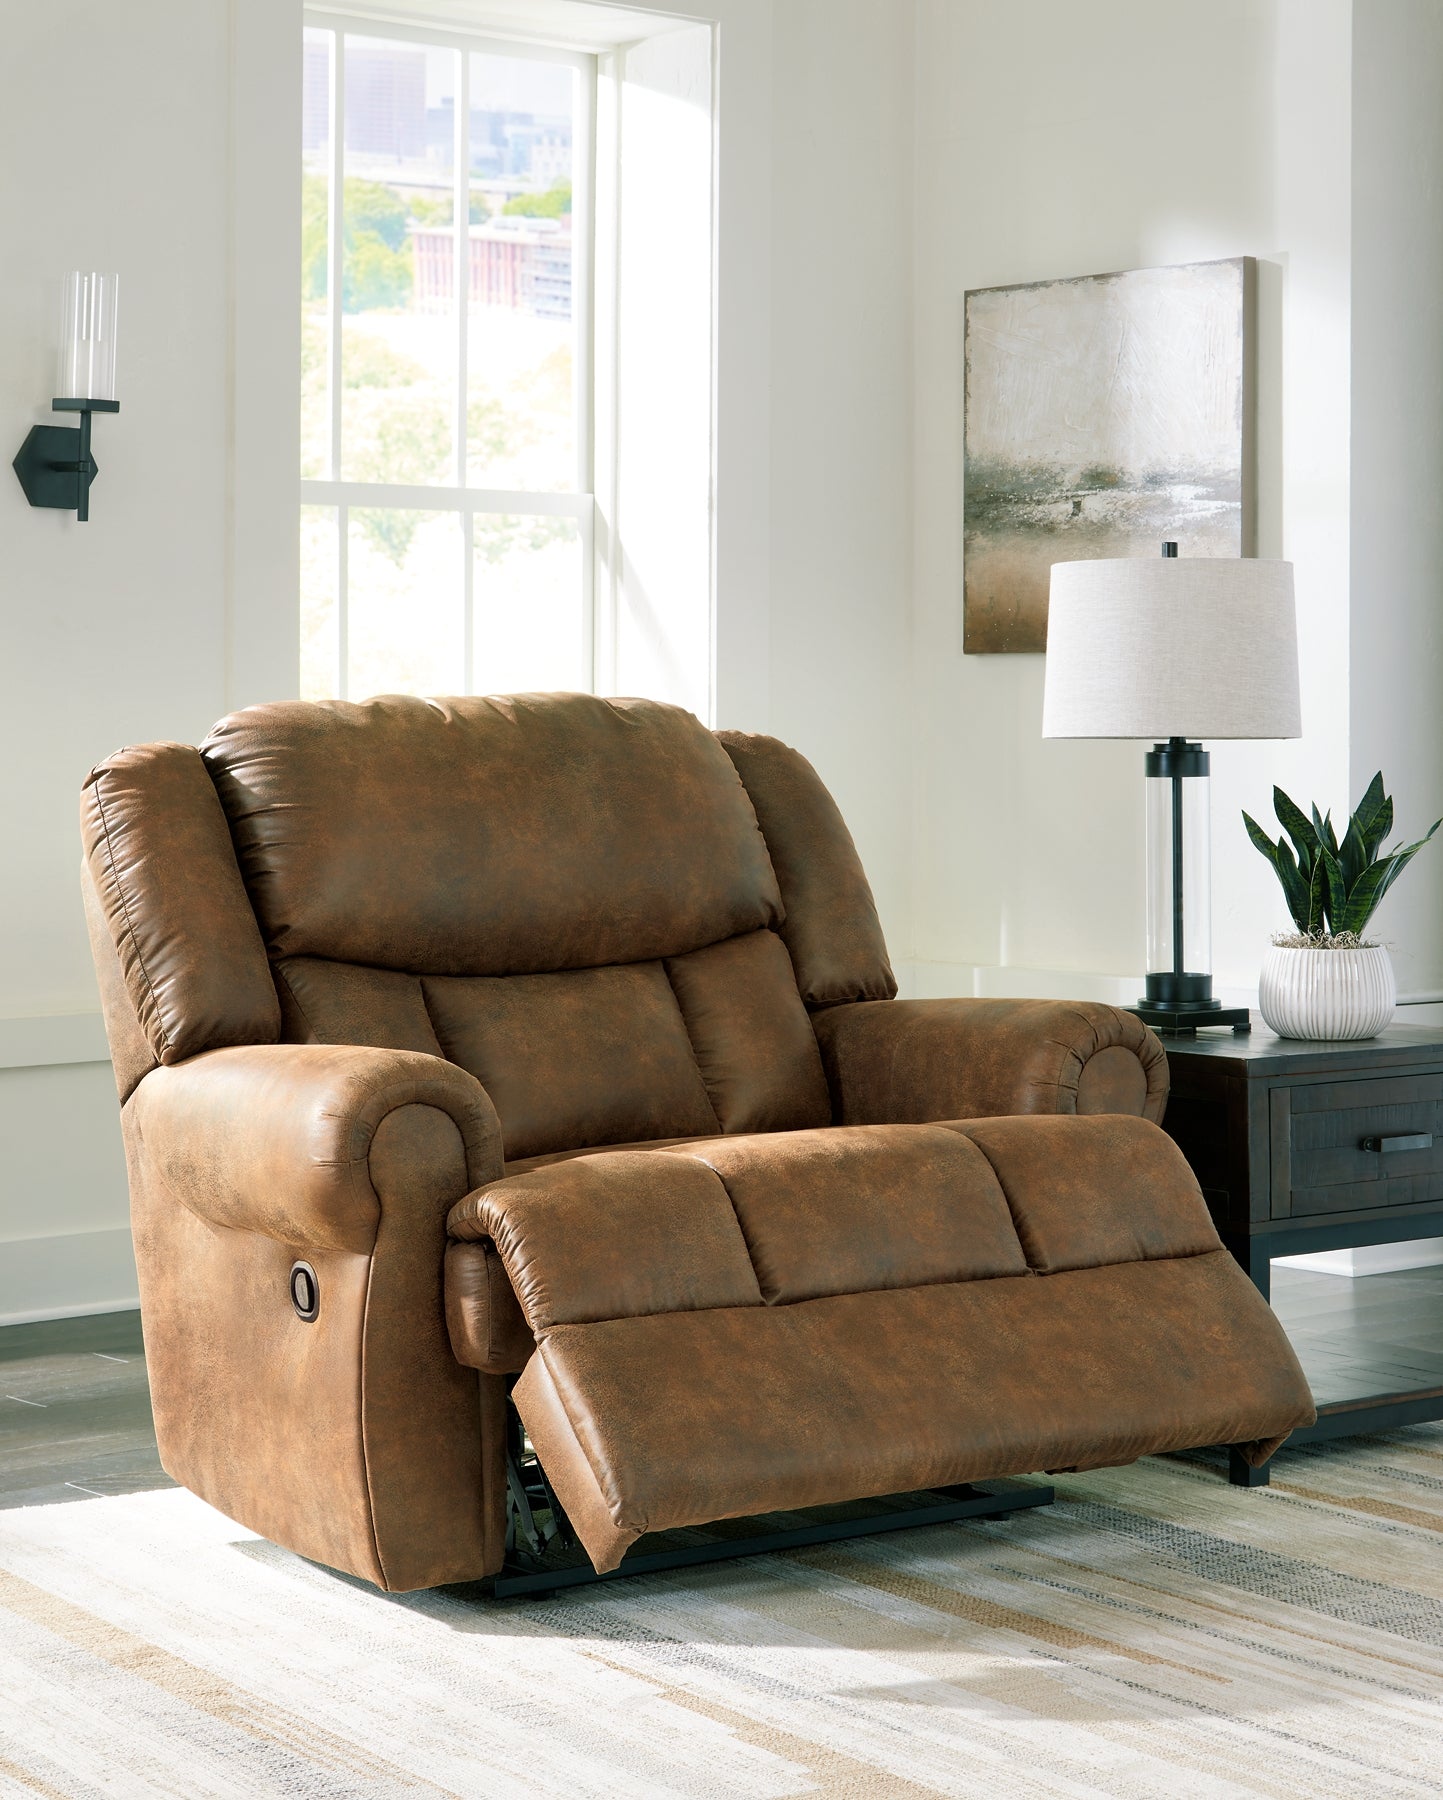 Boothbay Wide Seat Recliner JB's Furniture  Home Furniture, Home Decor, Furniture Store